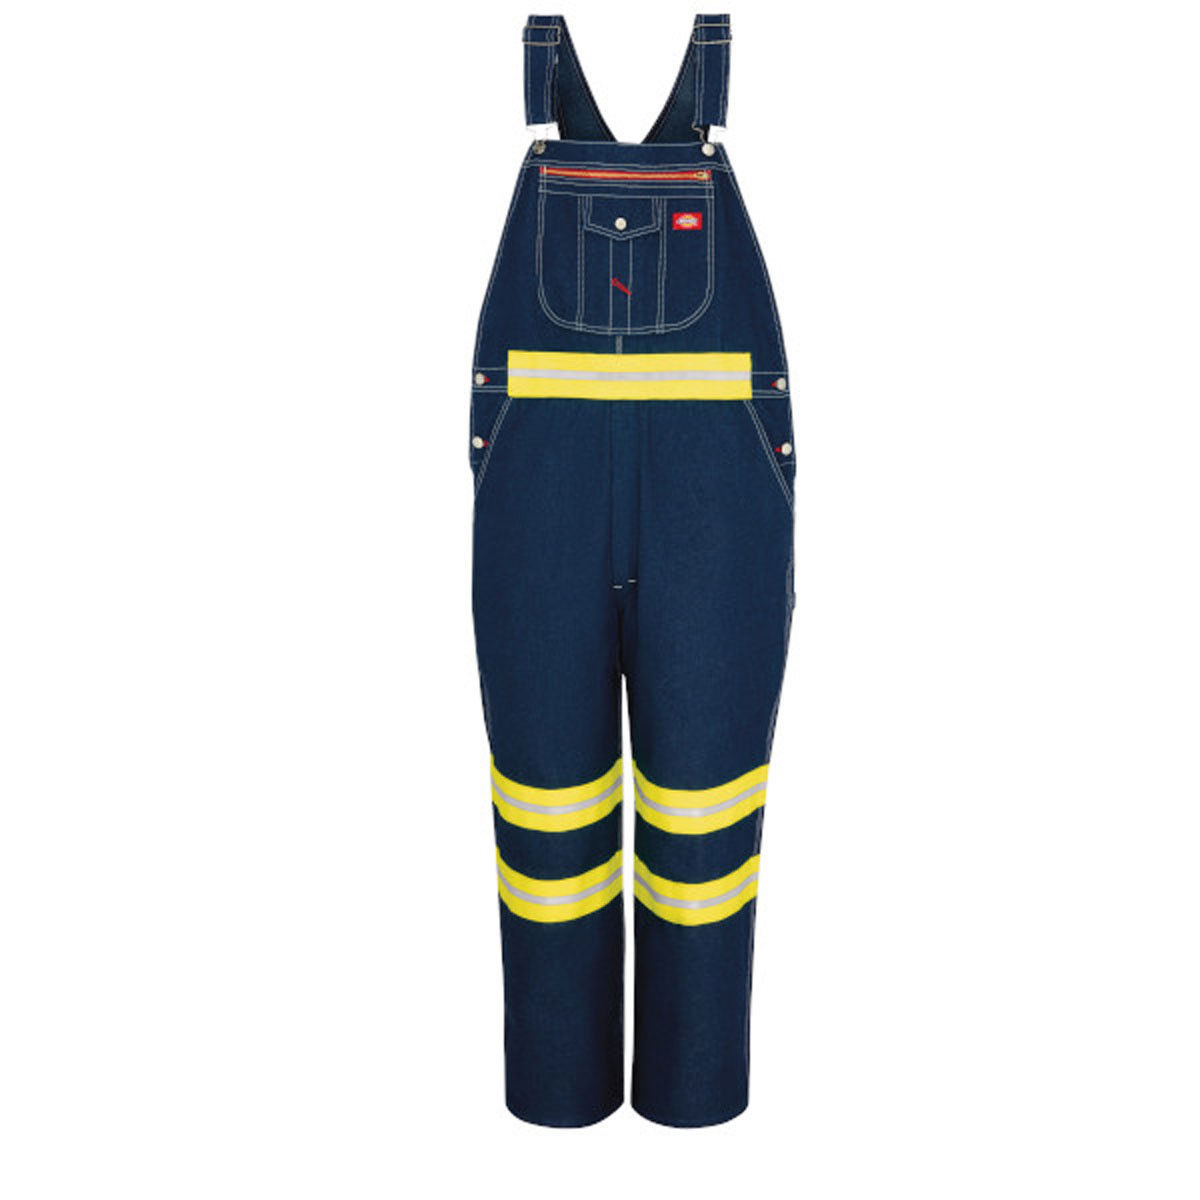 What additional features does the Dickies bib overall have?